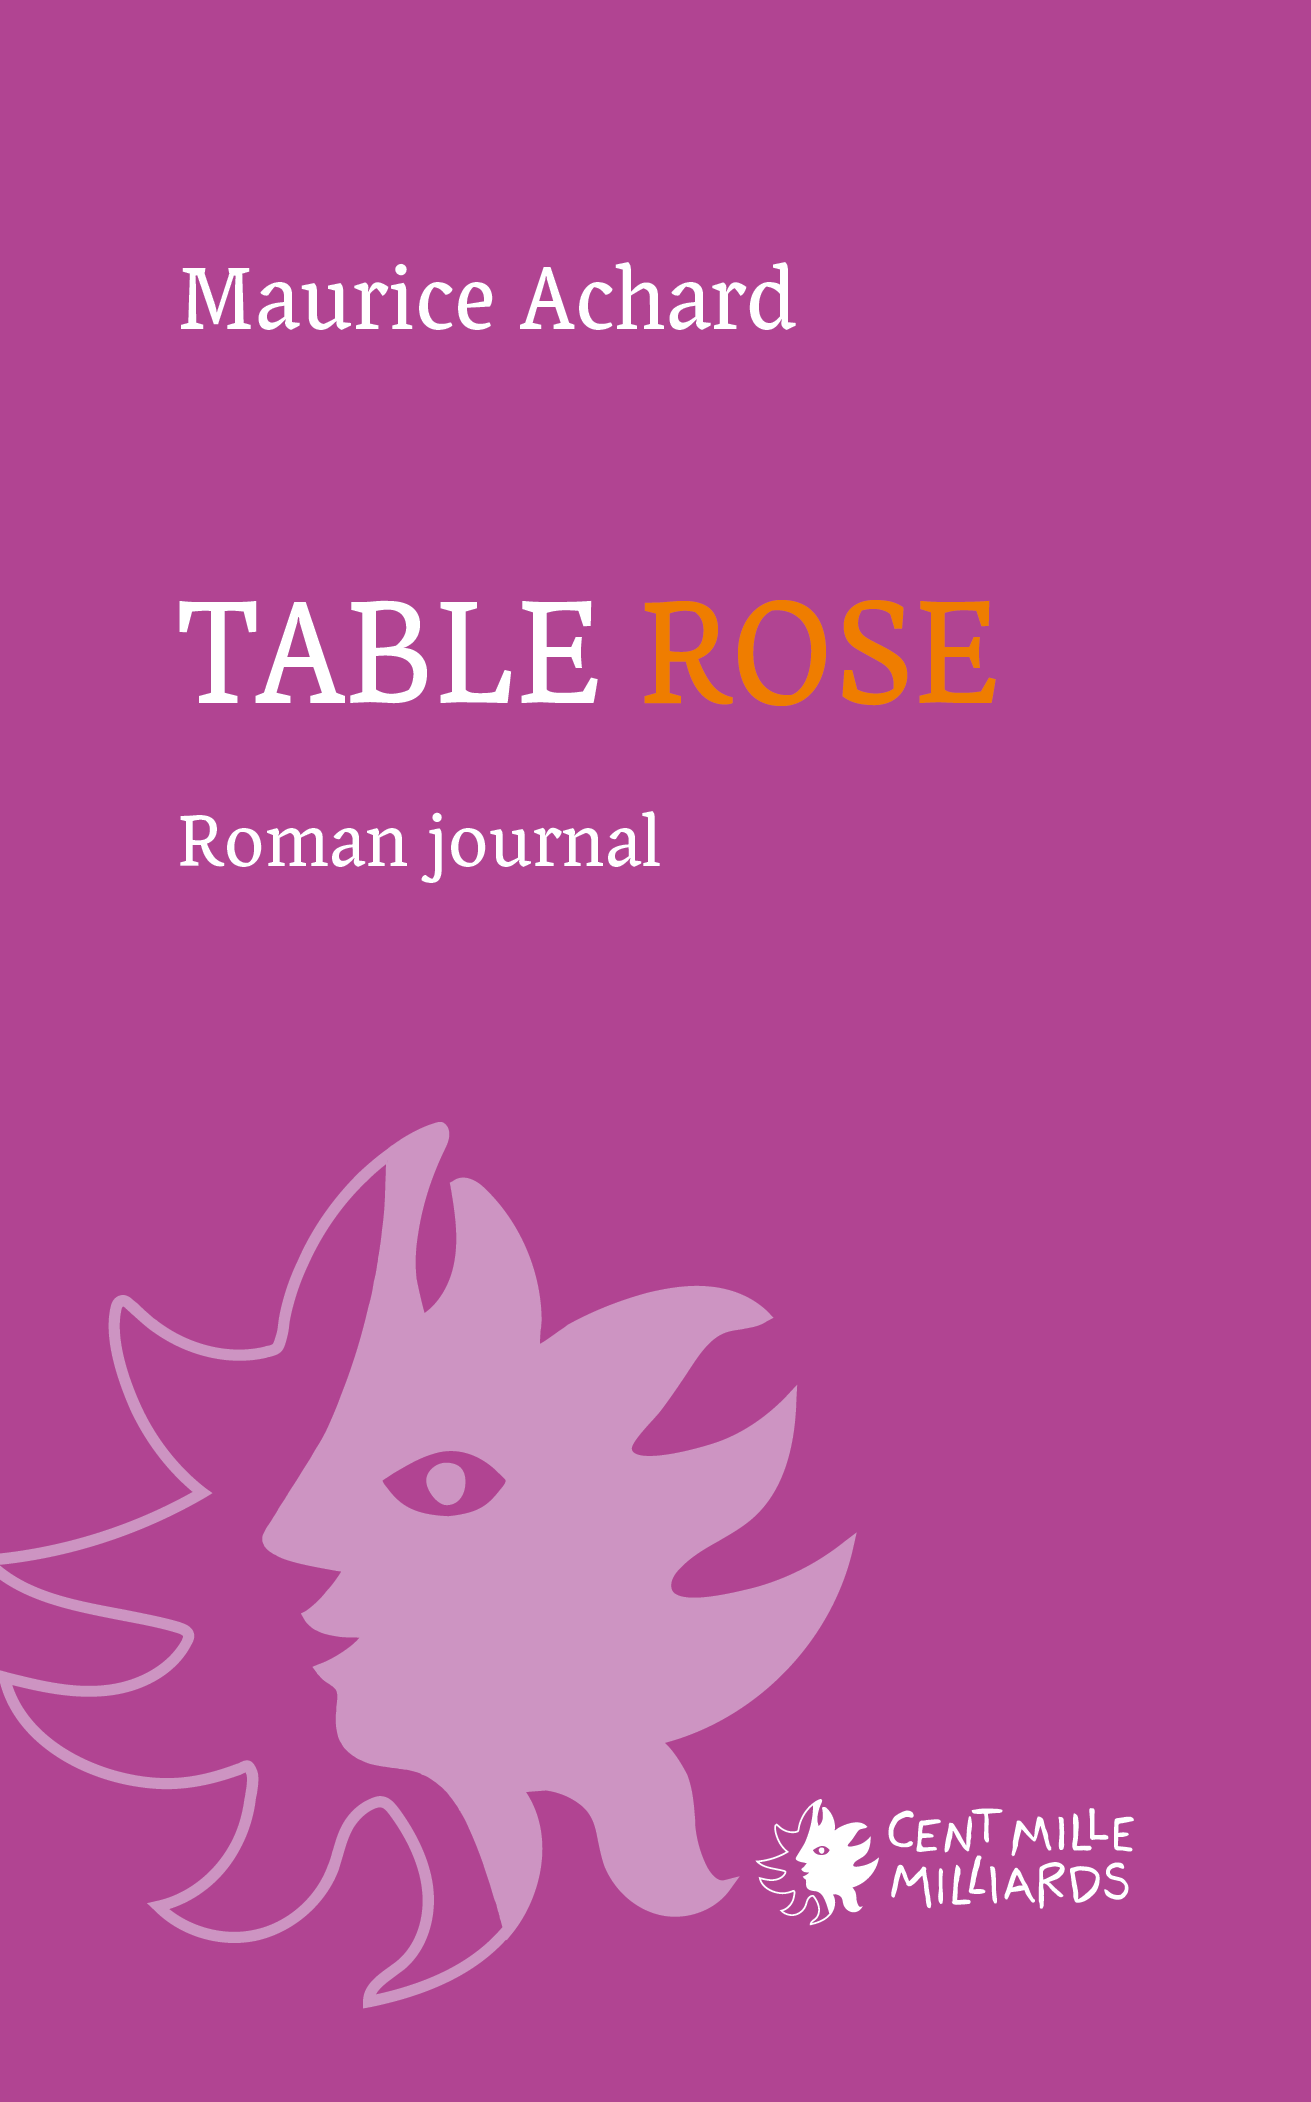 Table rose